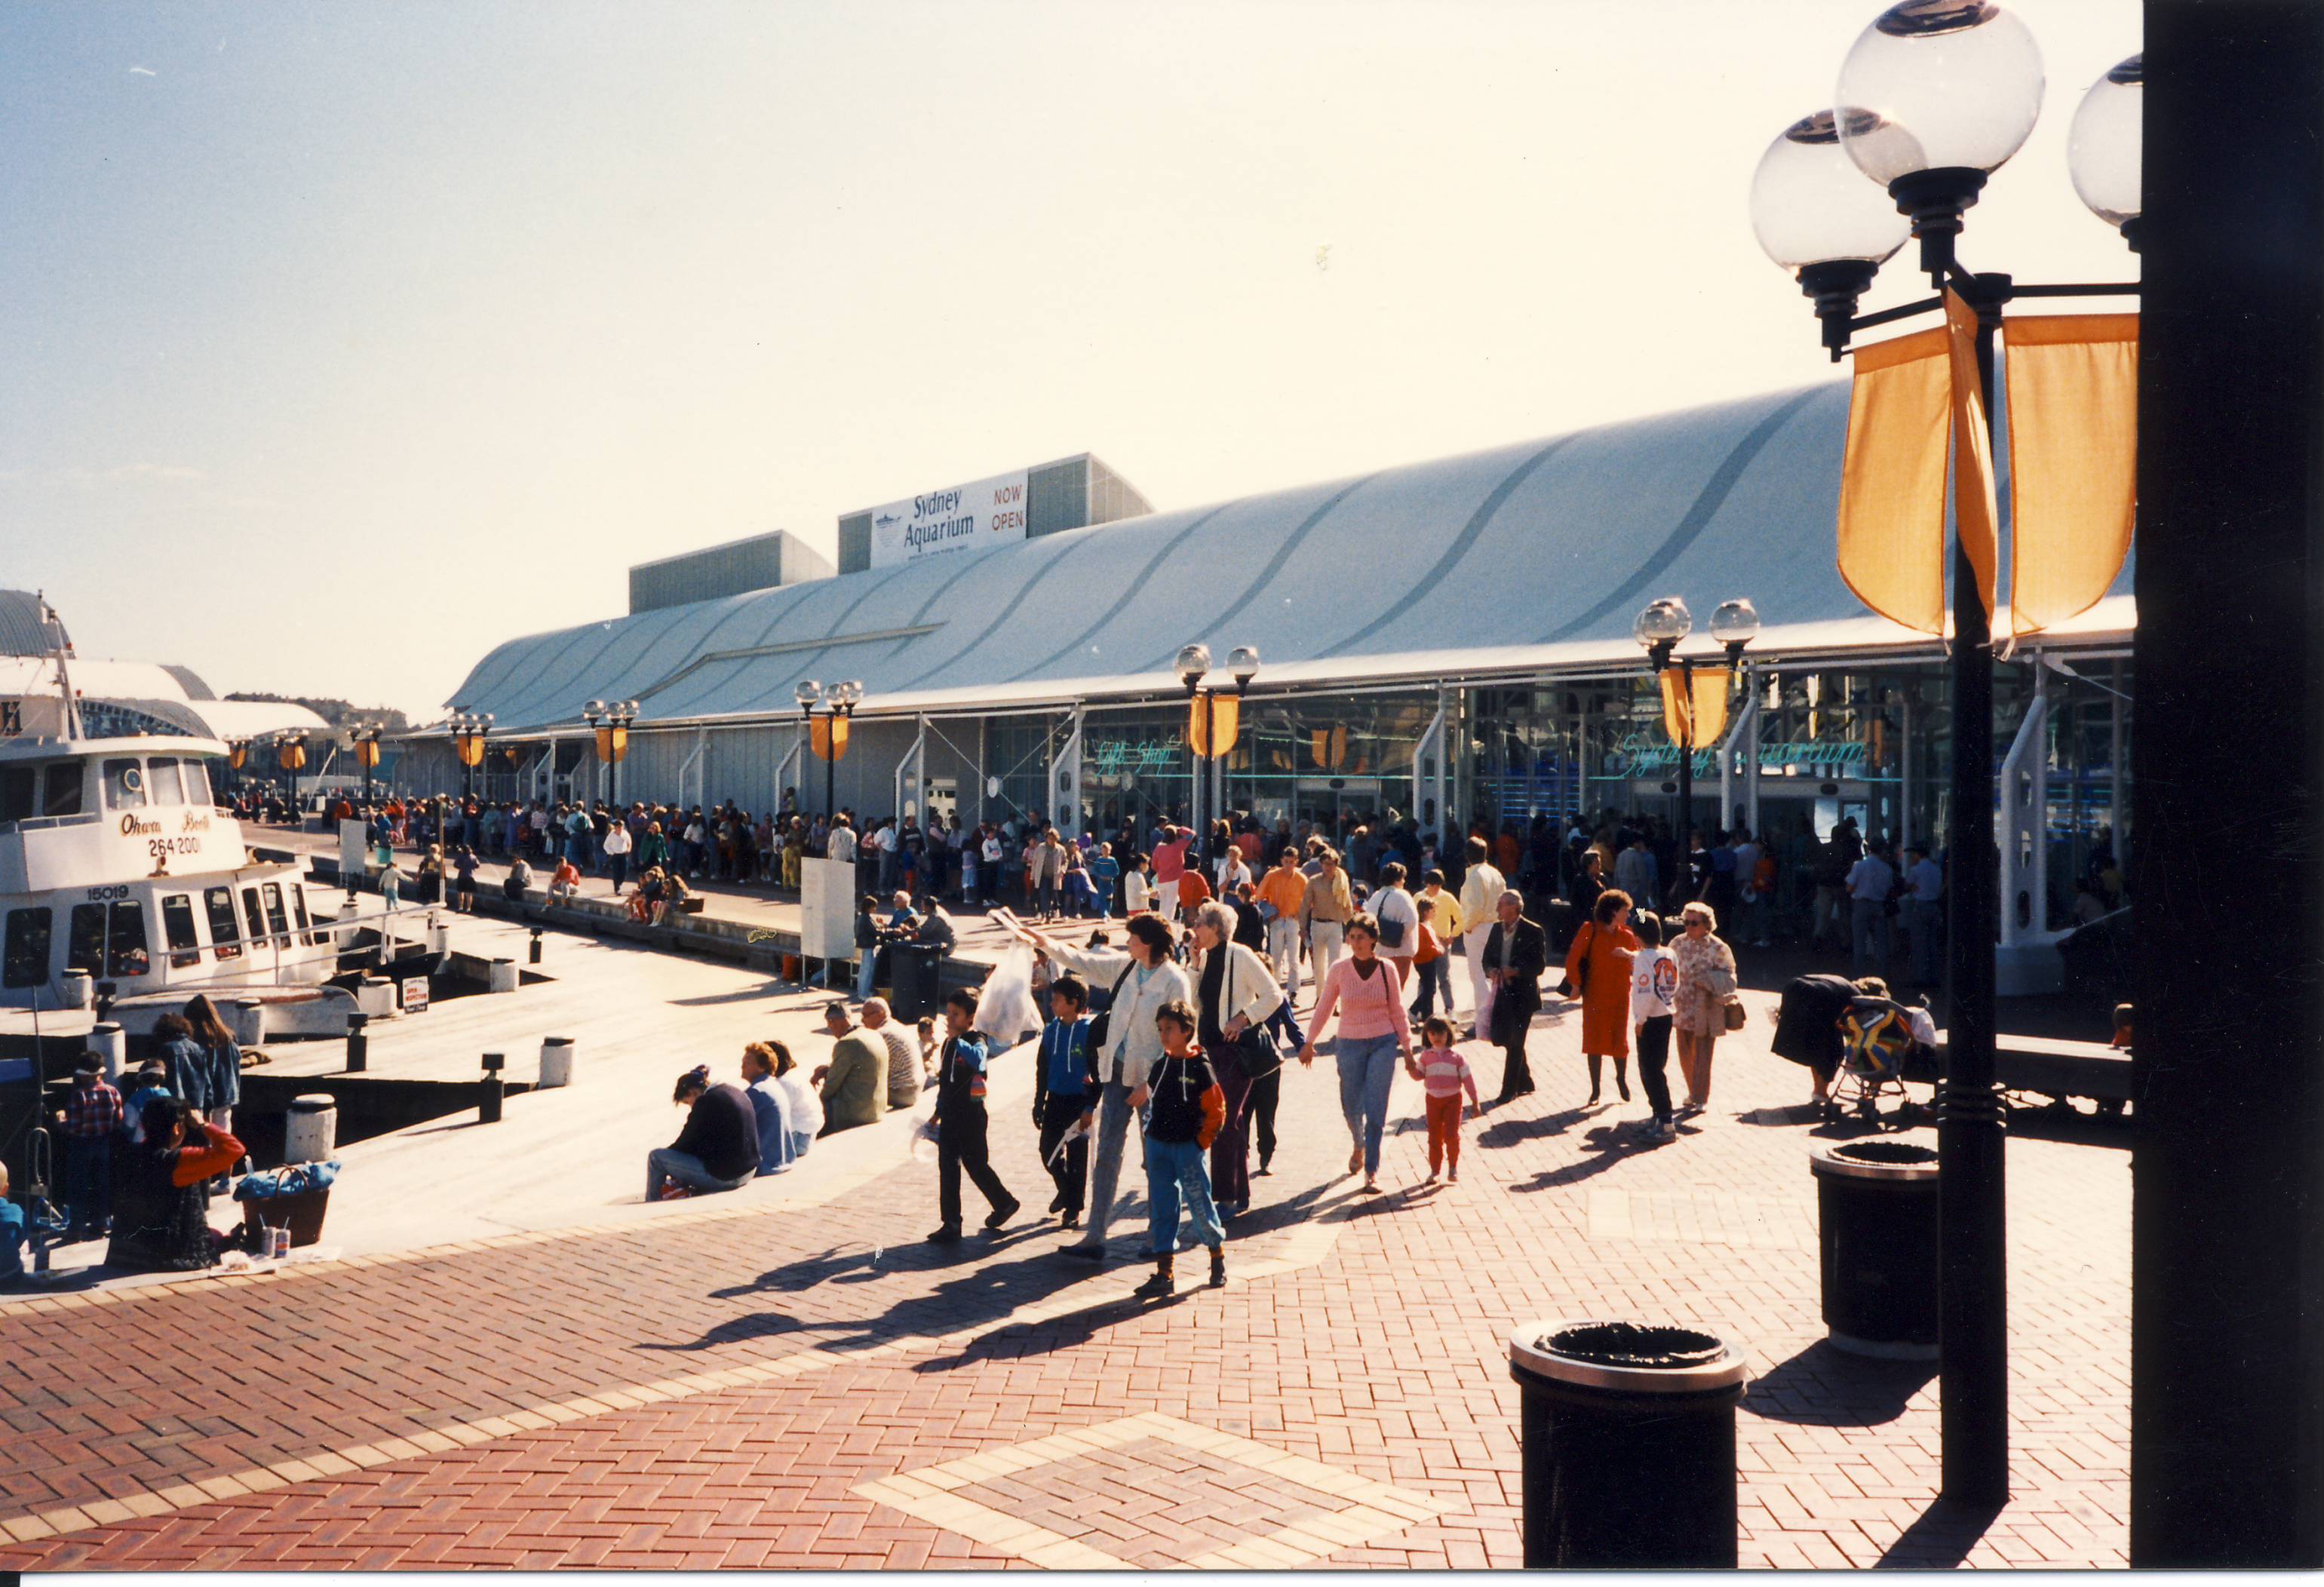 1988 September Sydney Aquarium Opens Its Doors For The First Time As The Largest Aquarium In The World